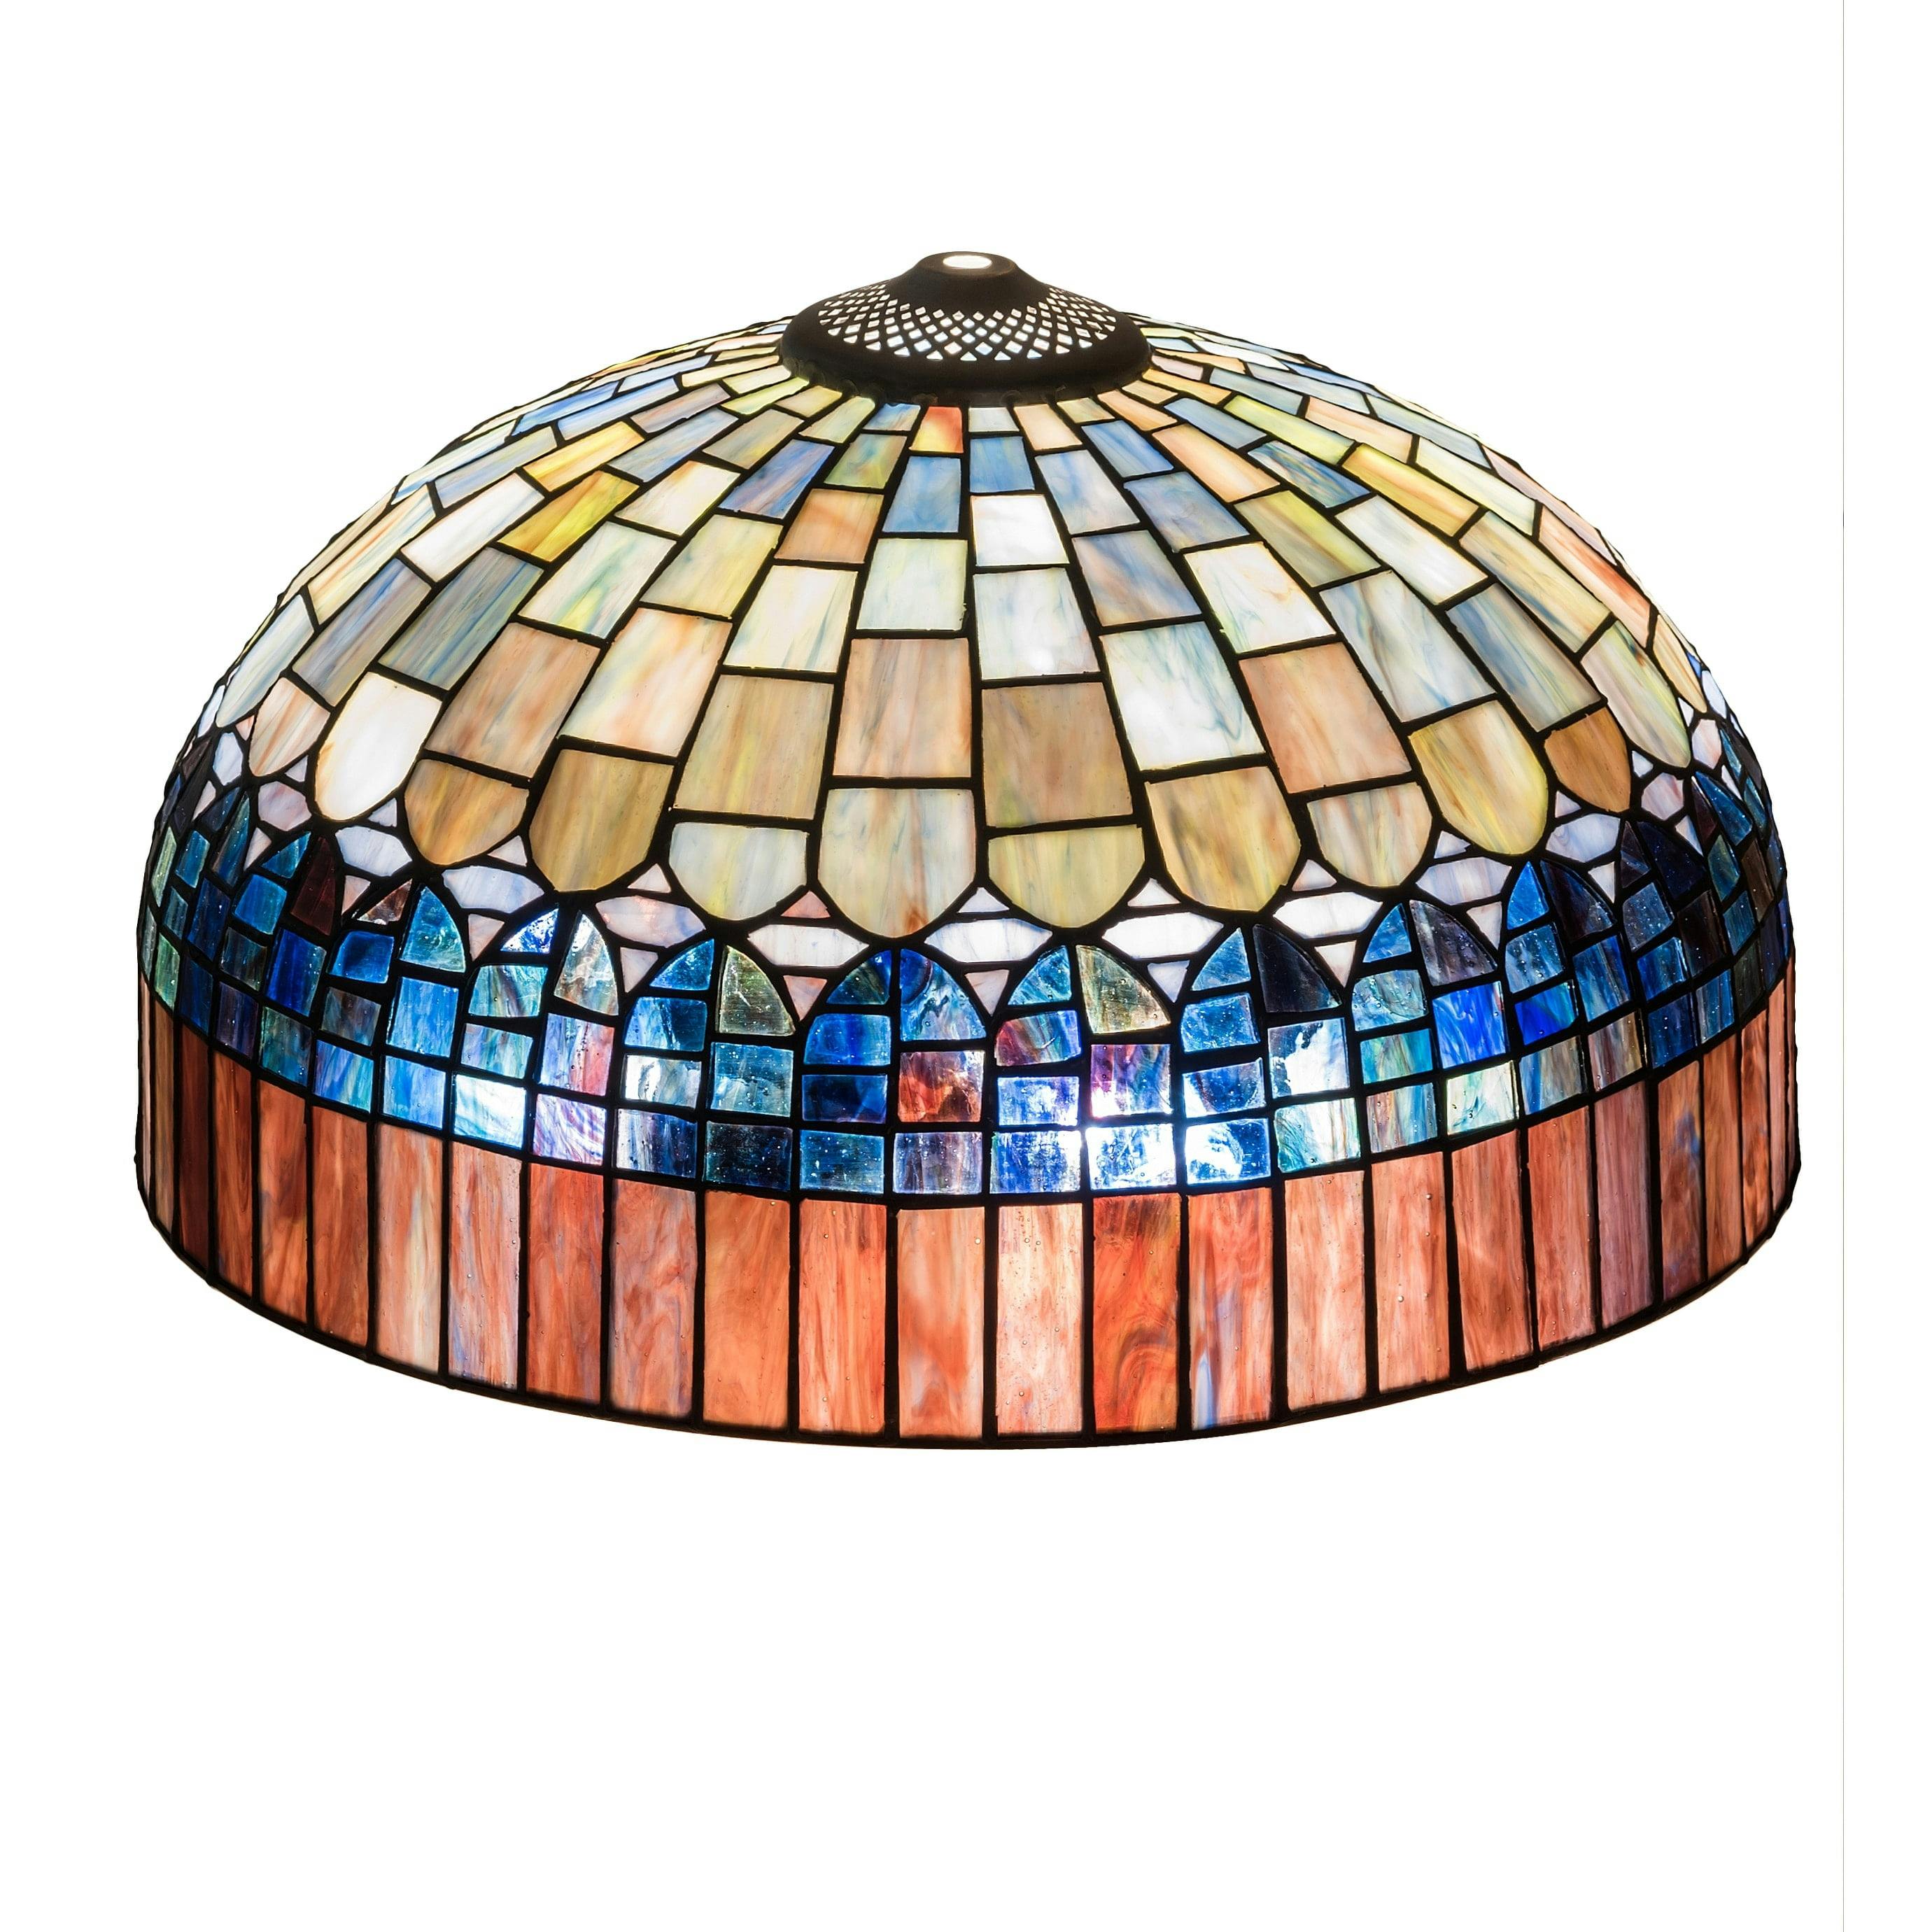 Artisan Crafted 16" Tiffany Candice Glass Shade in Mauve, Green, and Blue